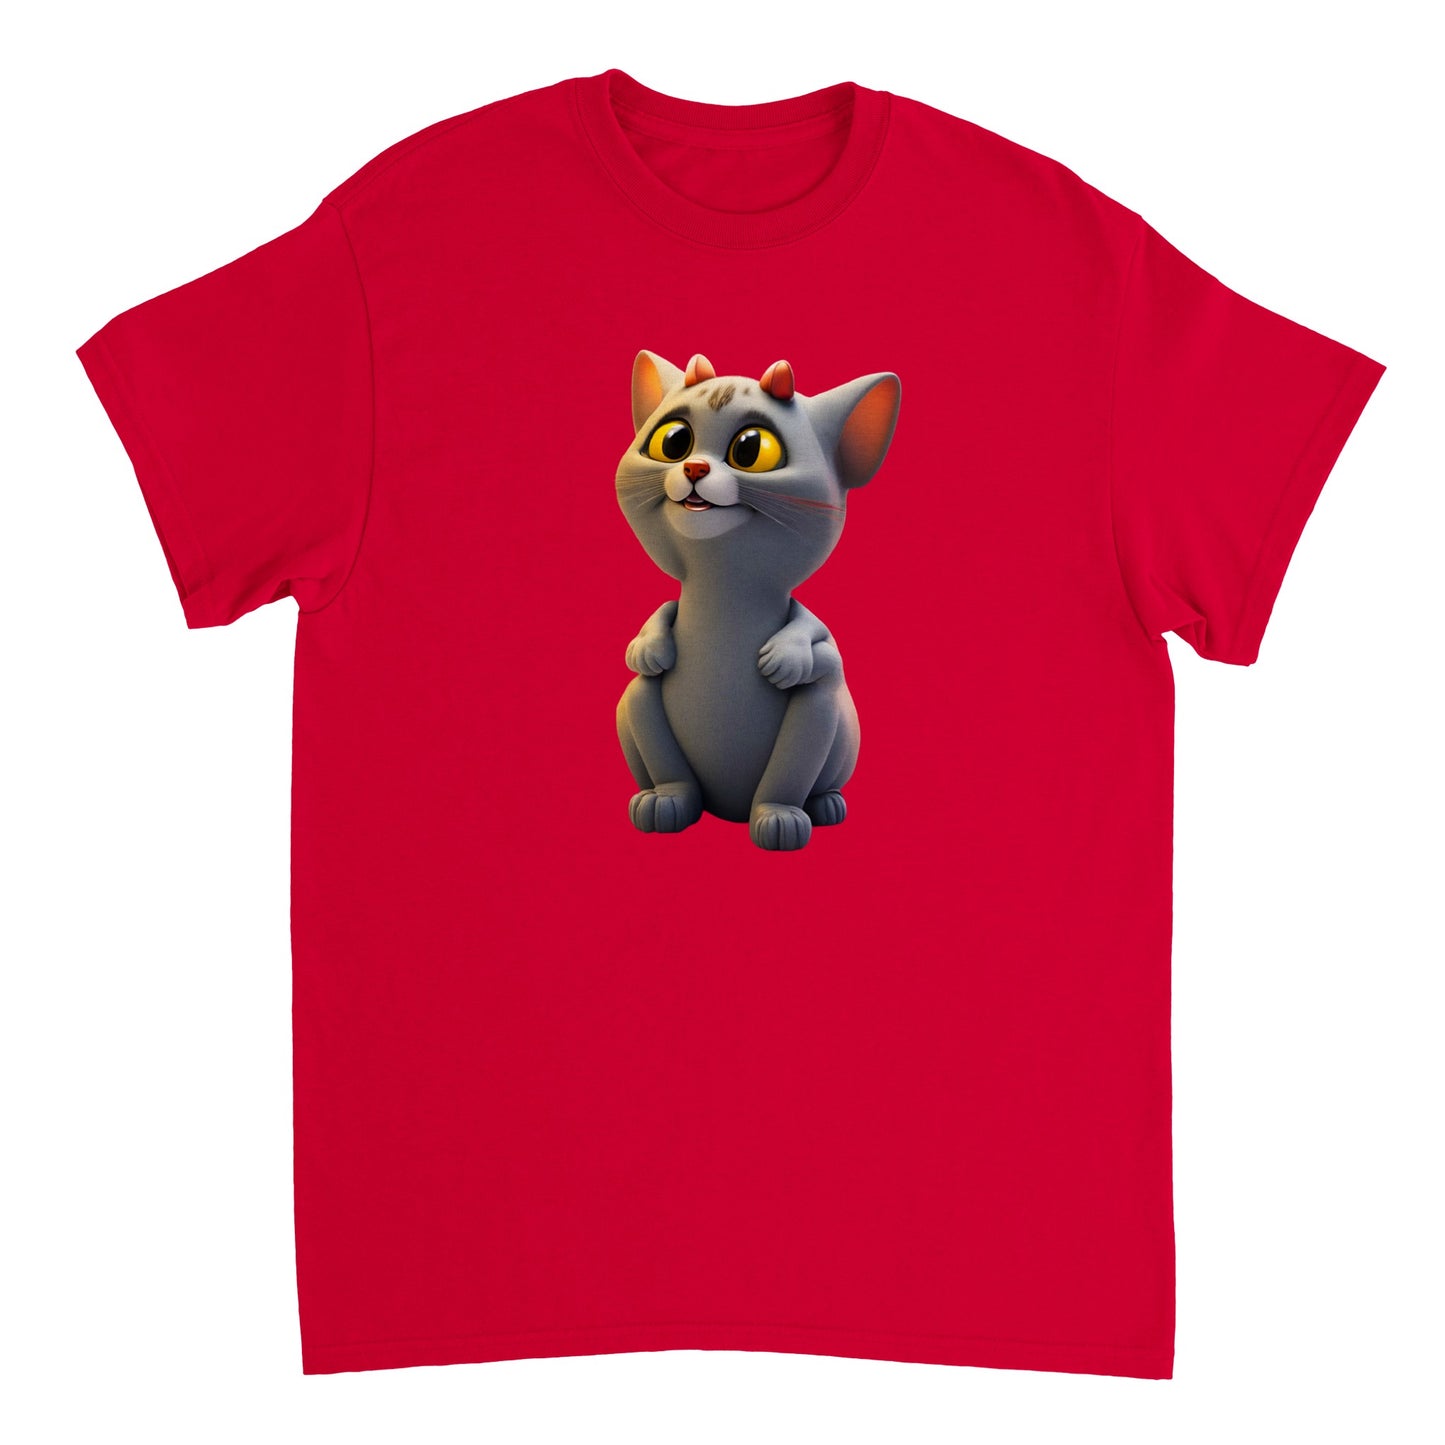 Adorable, Cool, Cute Cats and Kittens Toy - Heavyweight Unisex Crewneck T-shirt 49